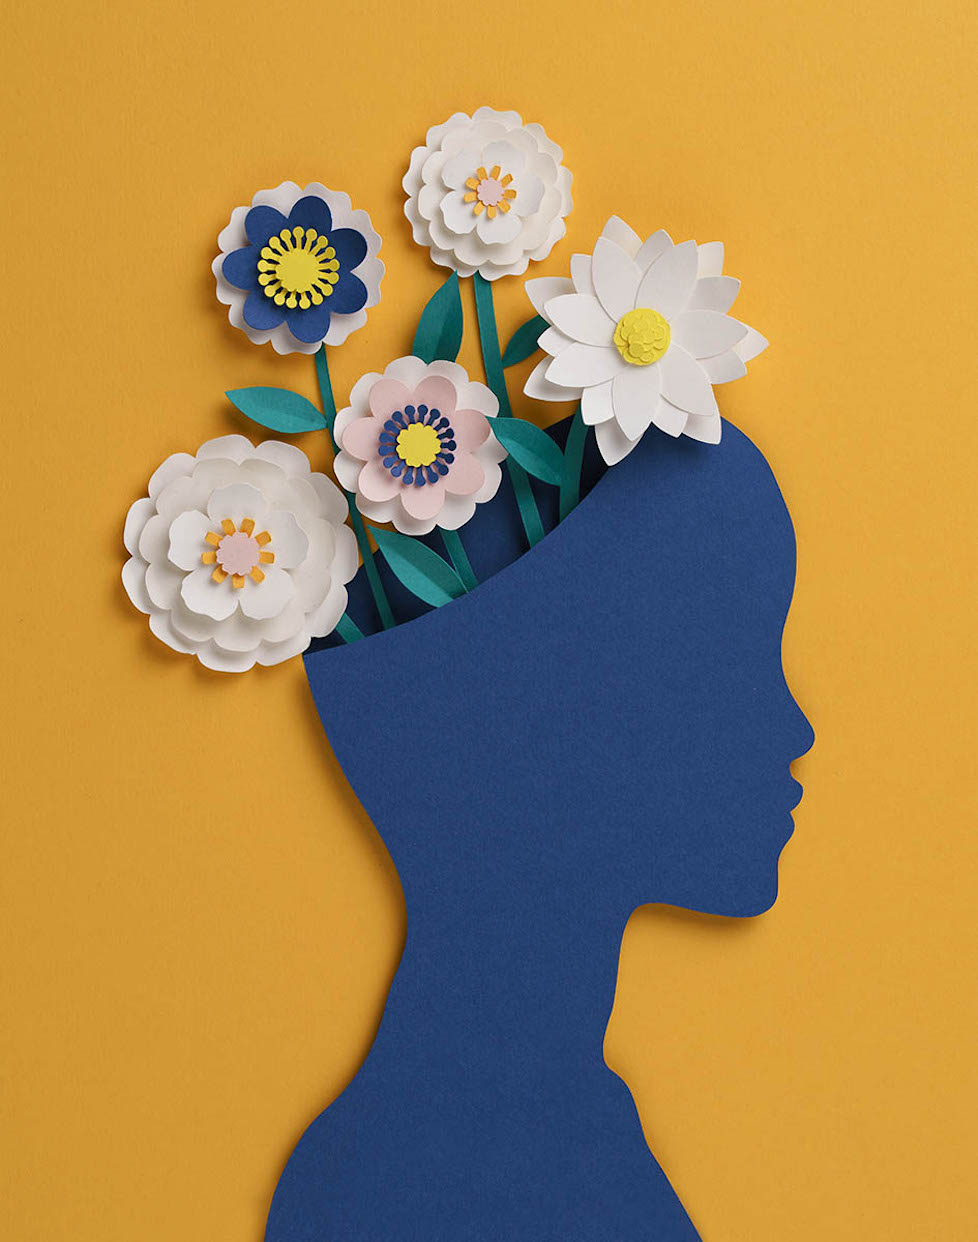 Paper-cut floral head with flowers growing out of the top of the head